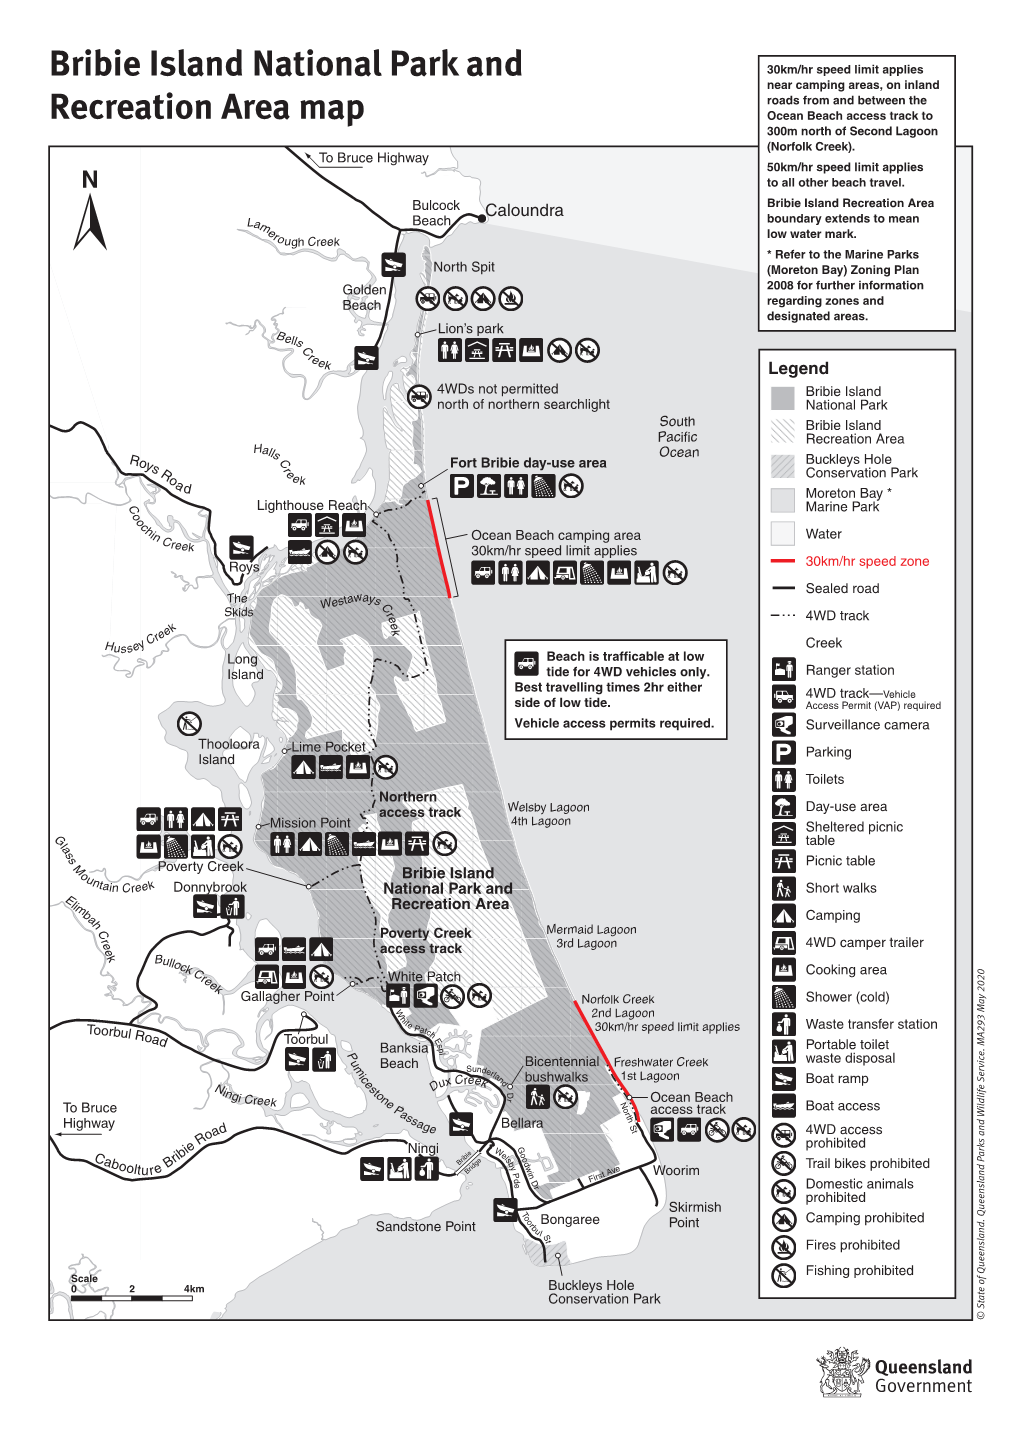 Bribie Island National Park and Recreation Area Map (PDF, 407KB)